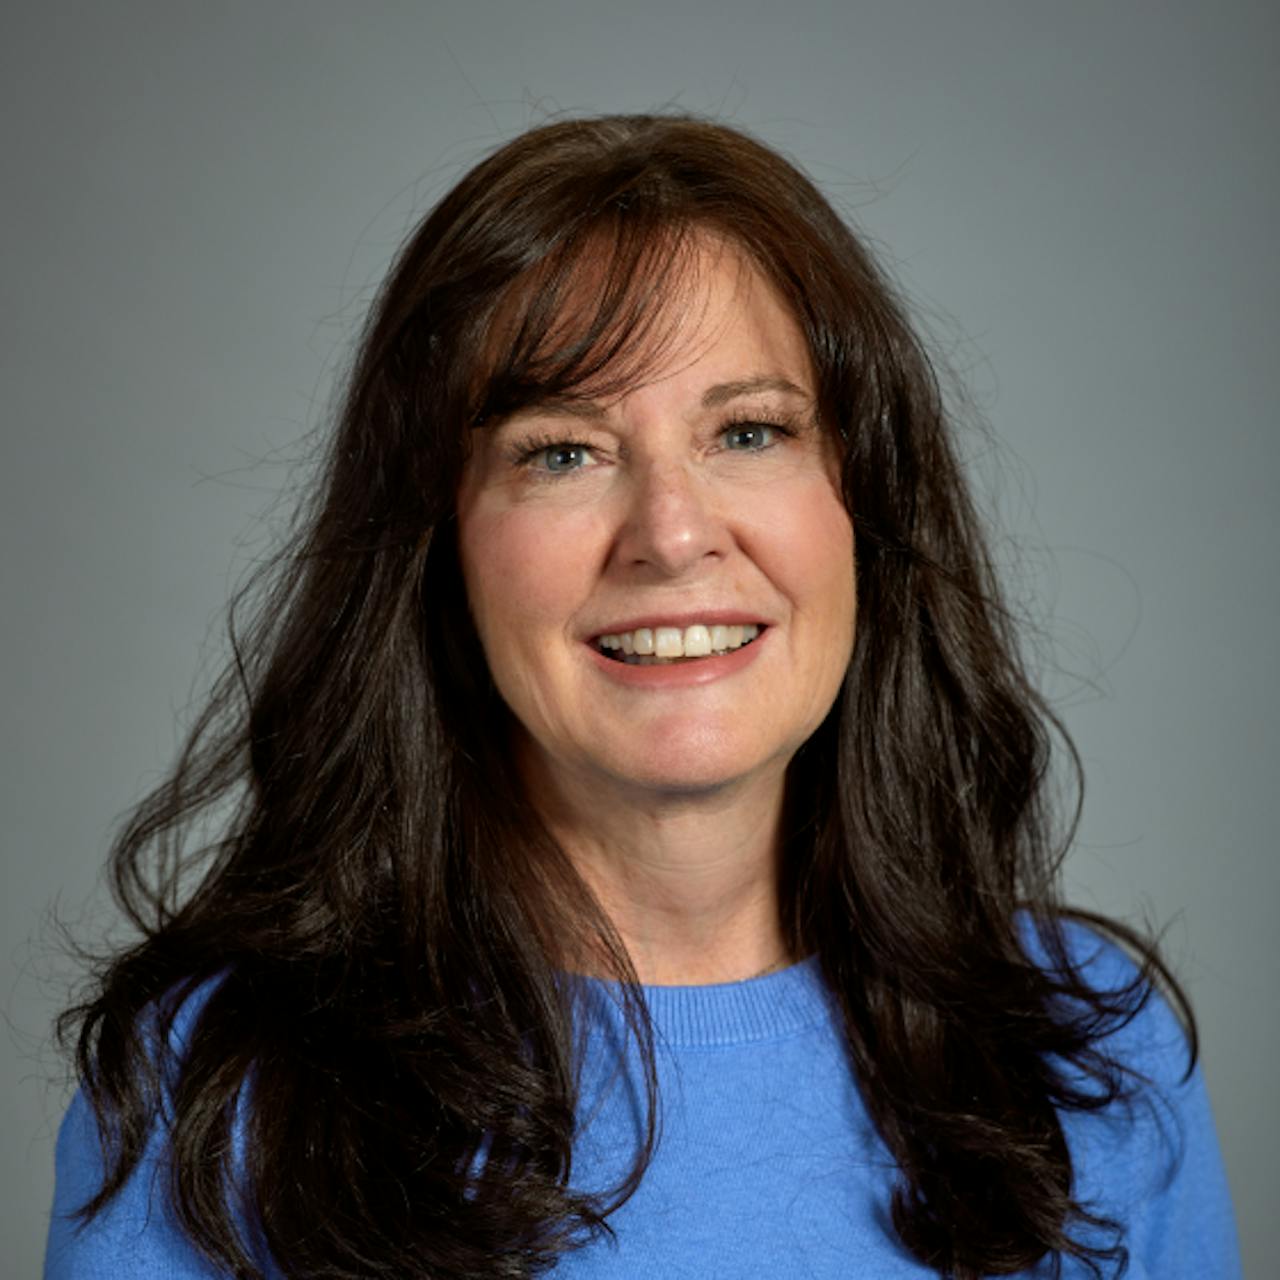 Shelley Garrity - Chief Human Resource Officer of MW Industries, Inc.